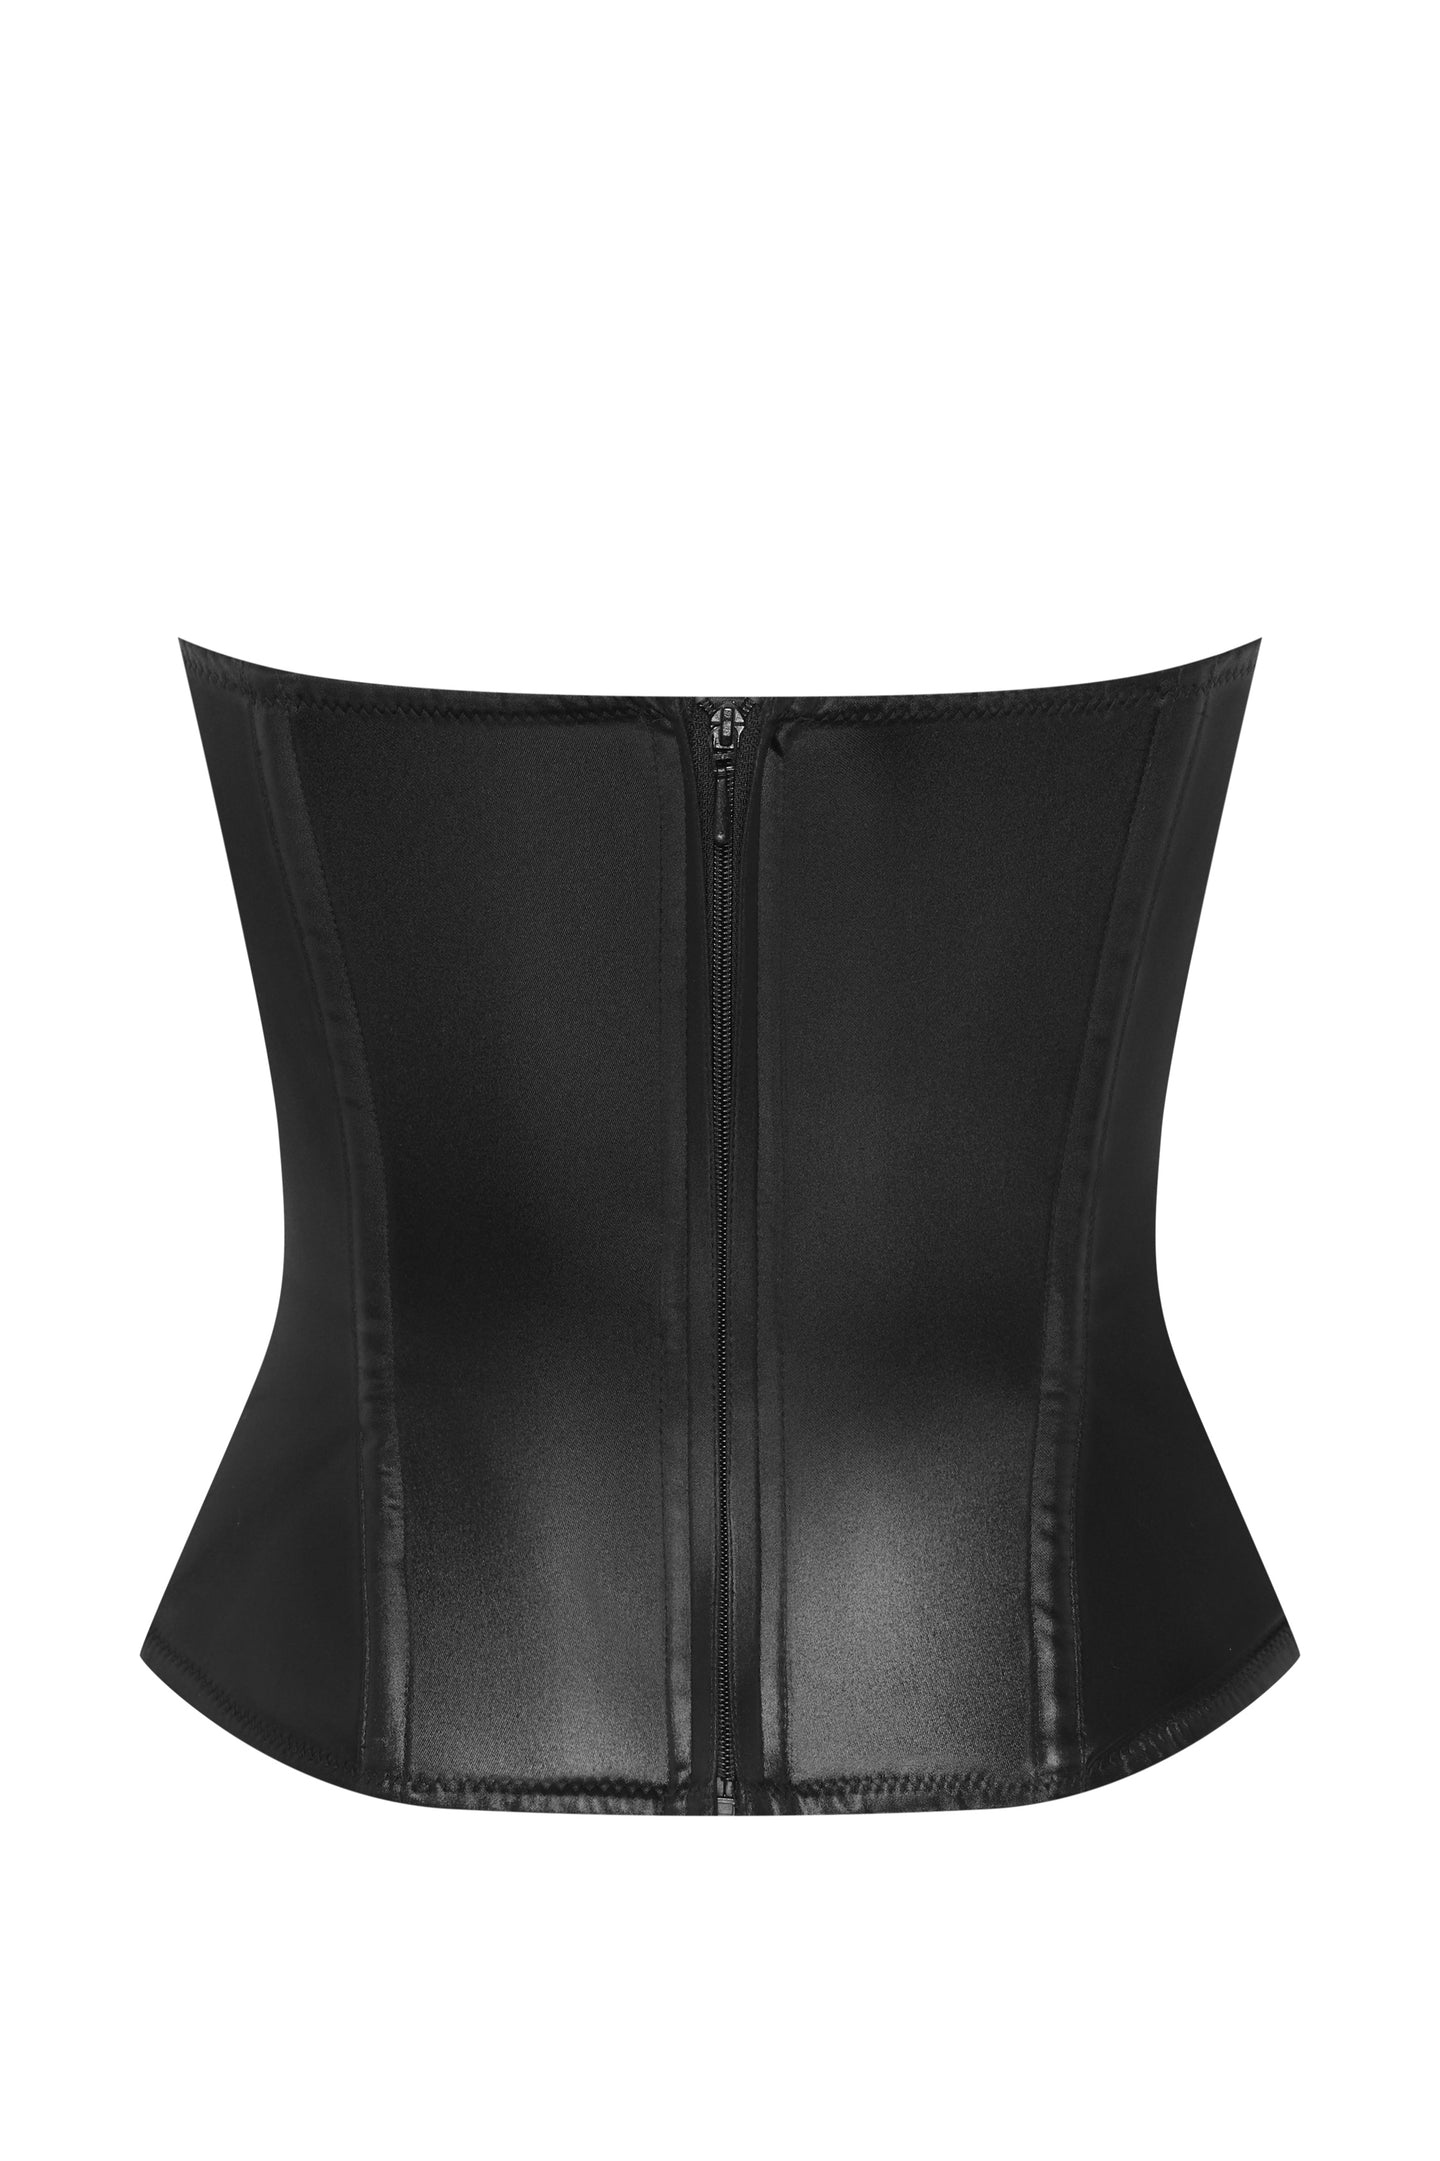 Black traditional corset made the French way. It has a leather appearance, giving a wetlook sheen. 